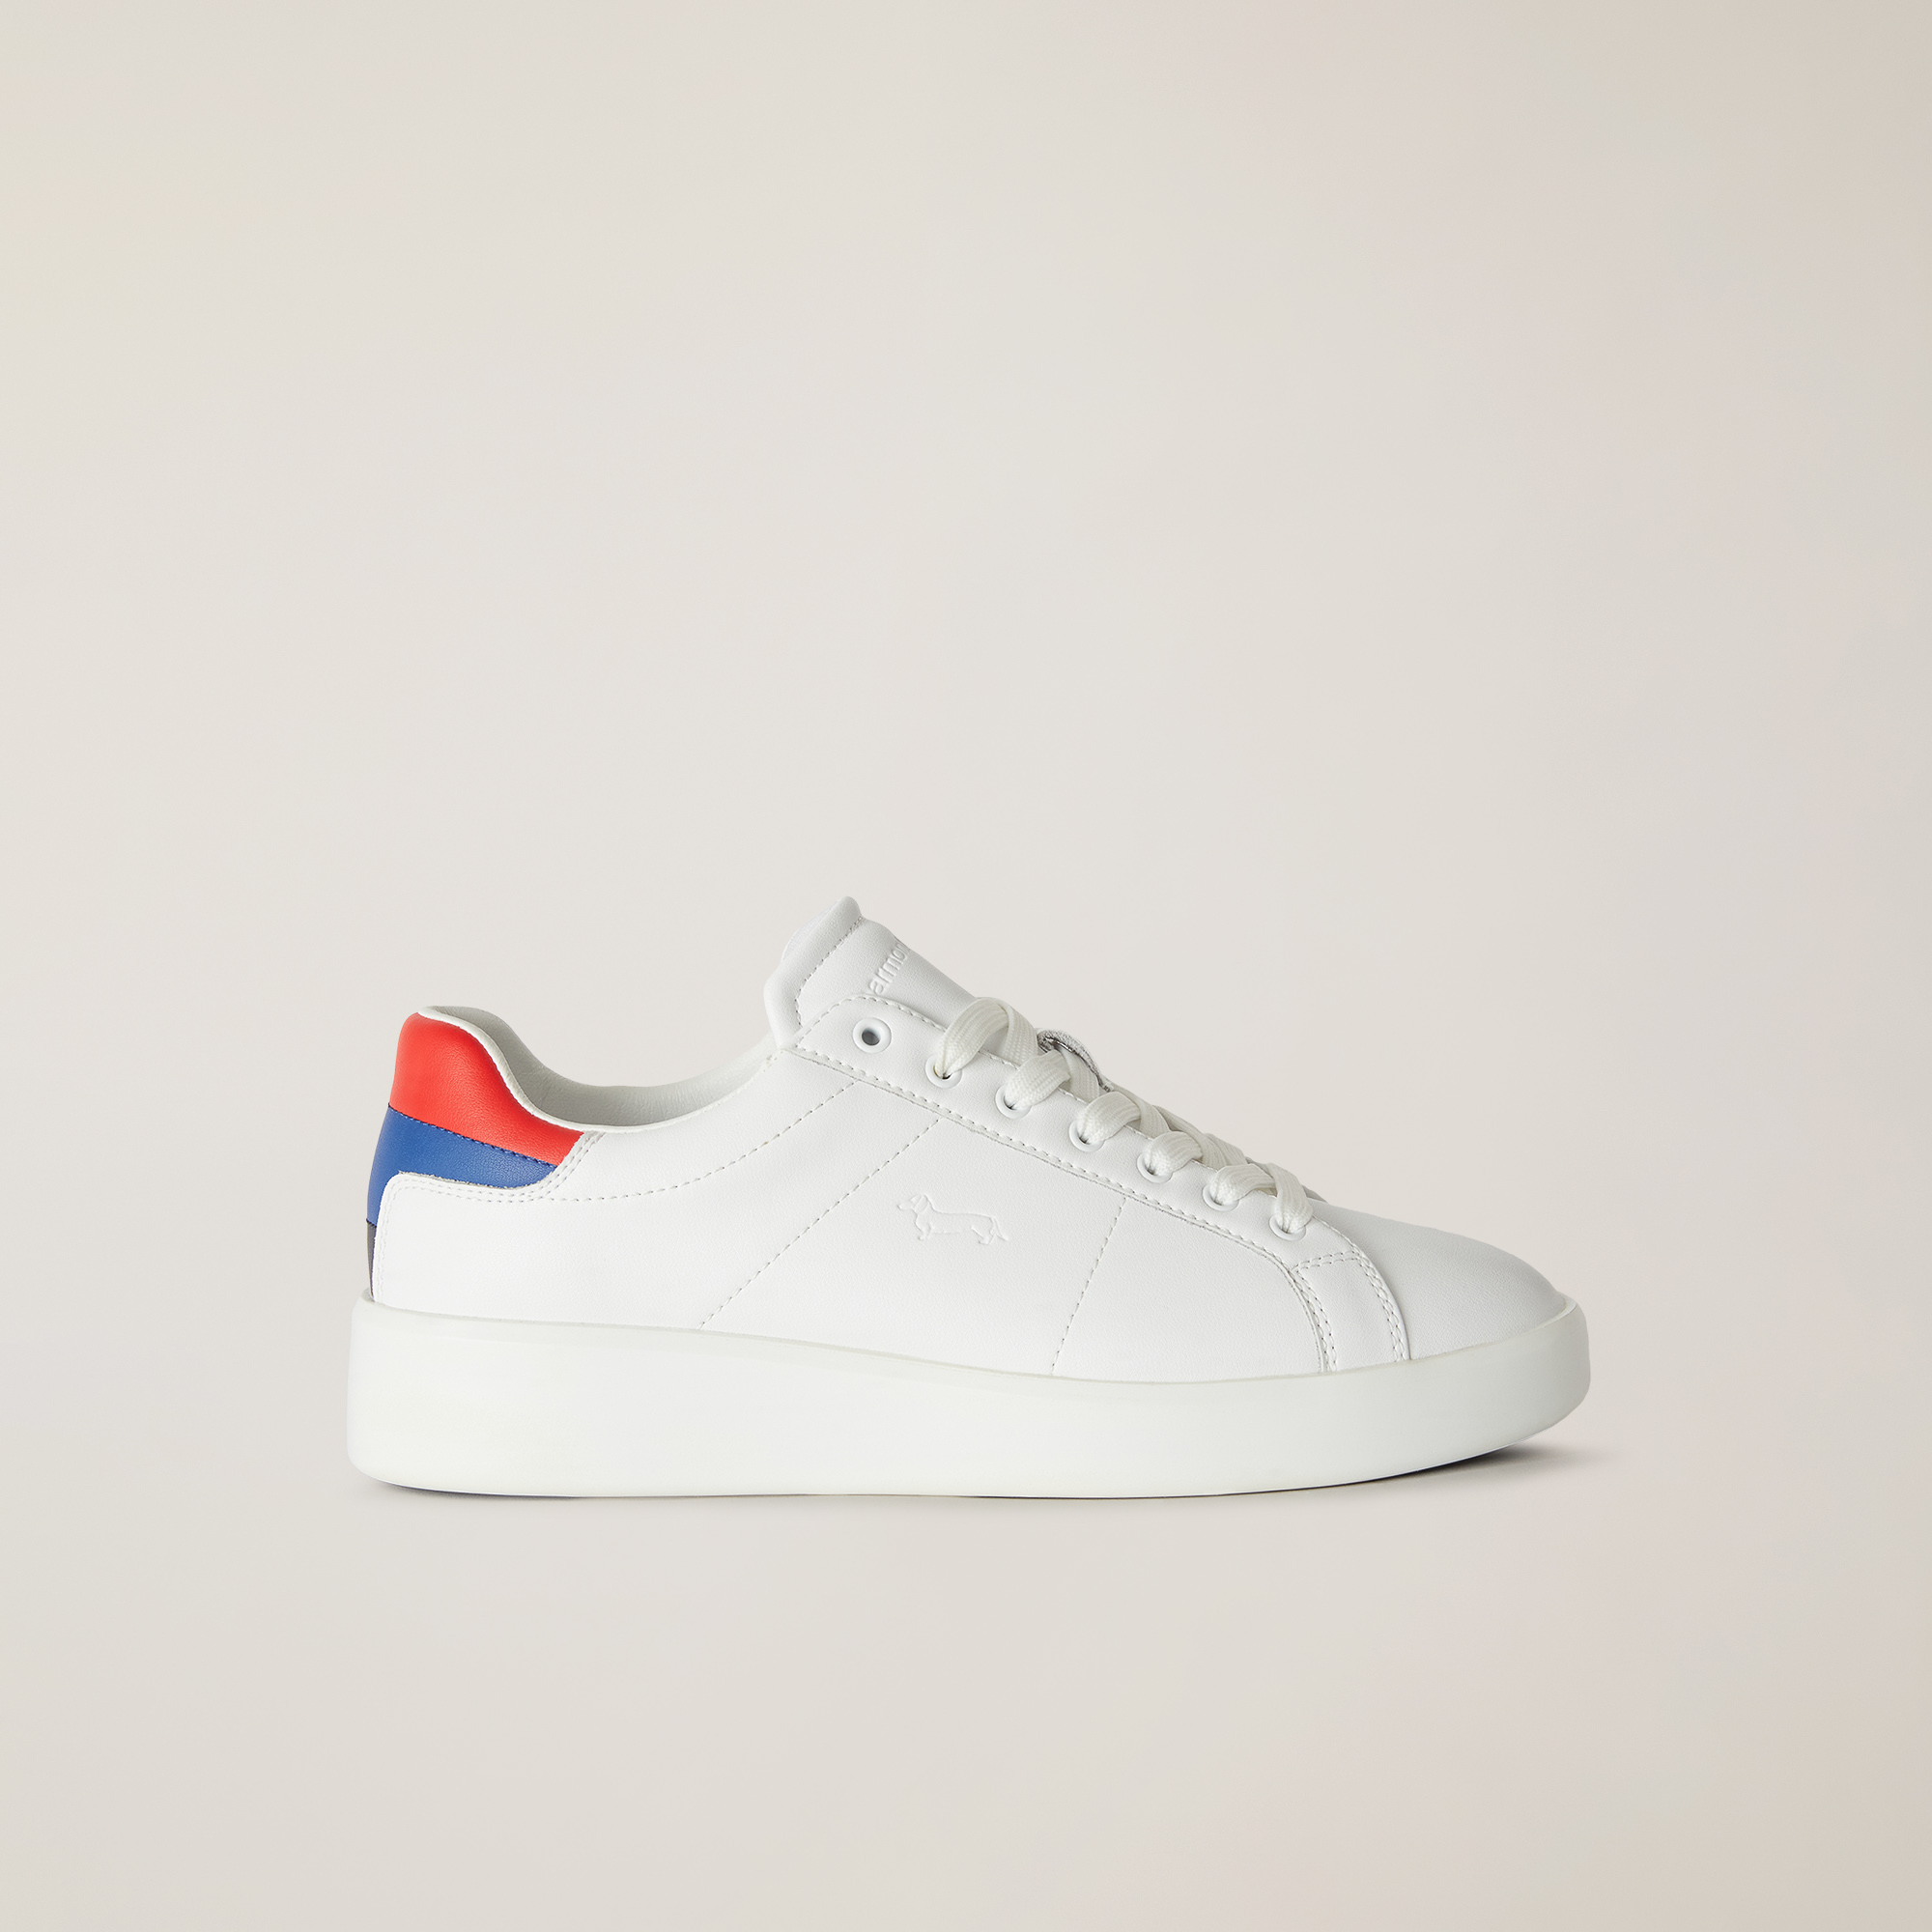 Sneaker with Oversize Sole, White/Red, large image number 0